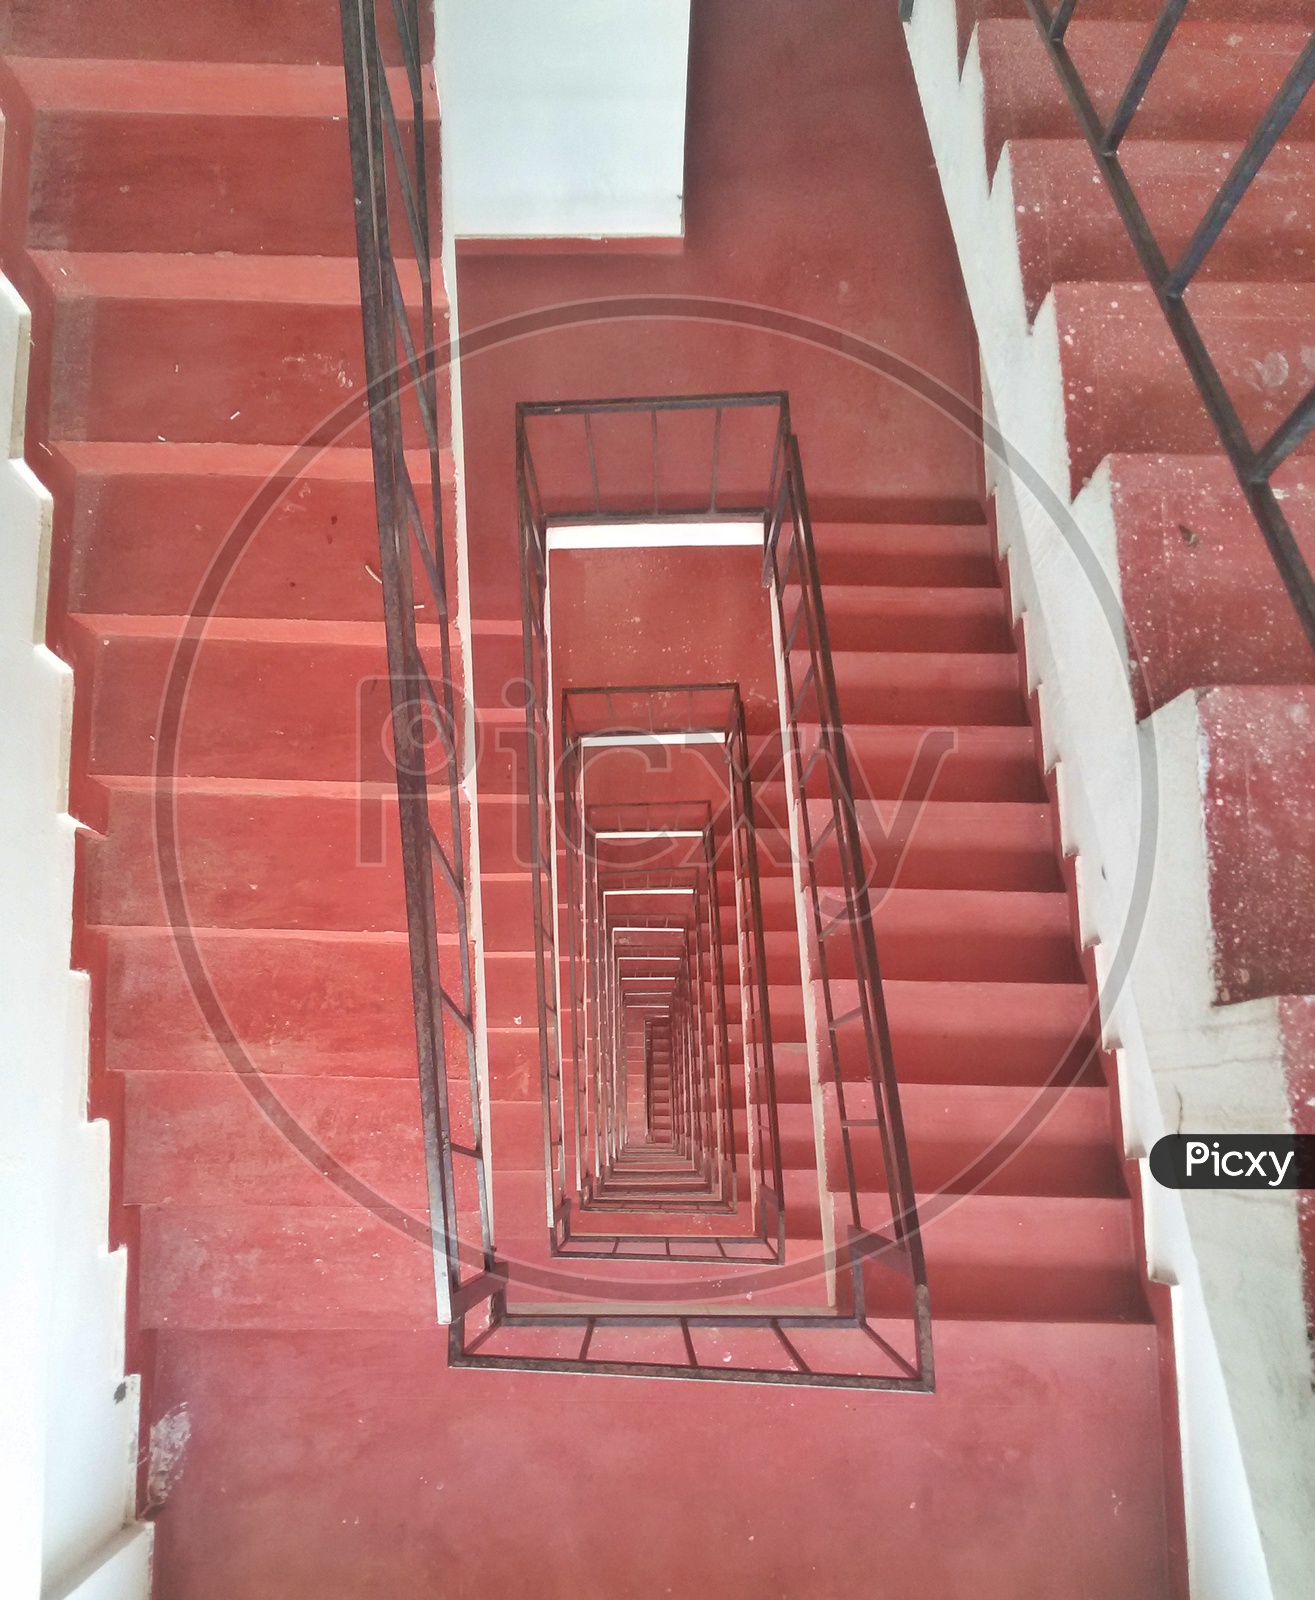 A red spiral staircase